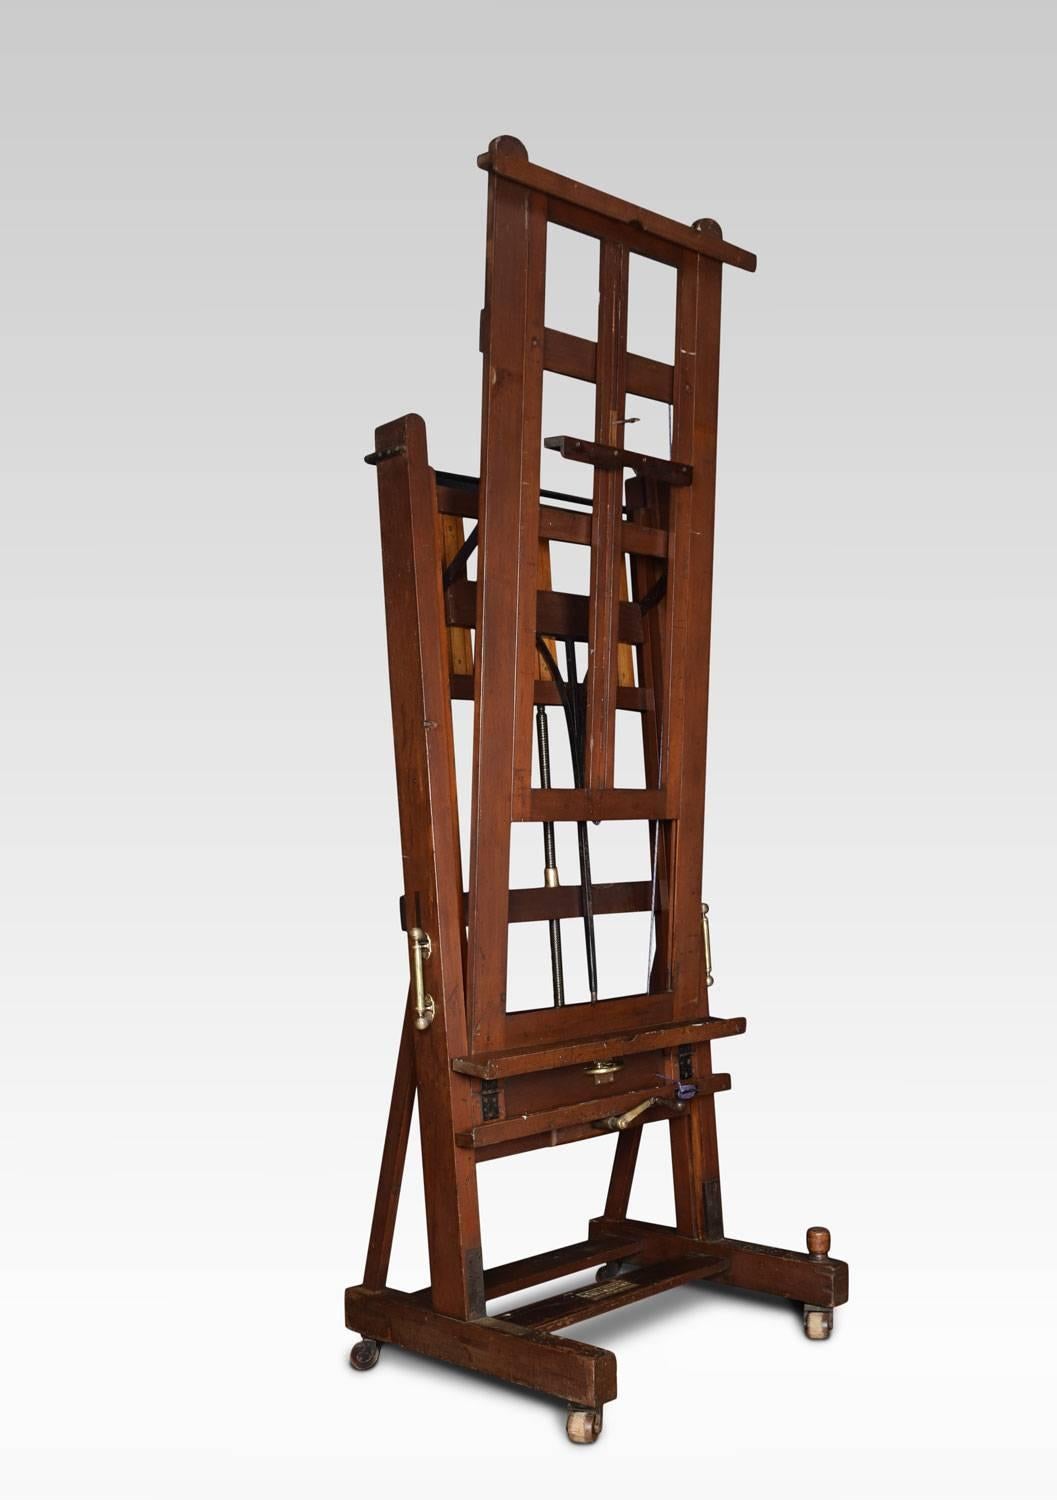 Large Windsor and Newton artist’s fully adjustable studio easel raised up on trestle base terminating in four lignum vitae casters.
Dimensions:
Height 96 inches when open 159 inches
Width 40.5 inches
Depth 31.5 inches.